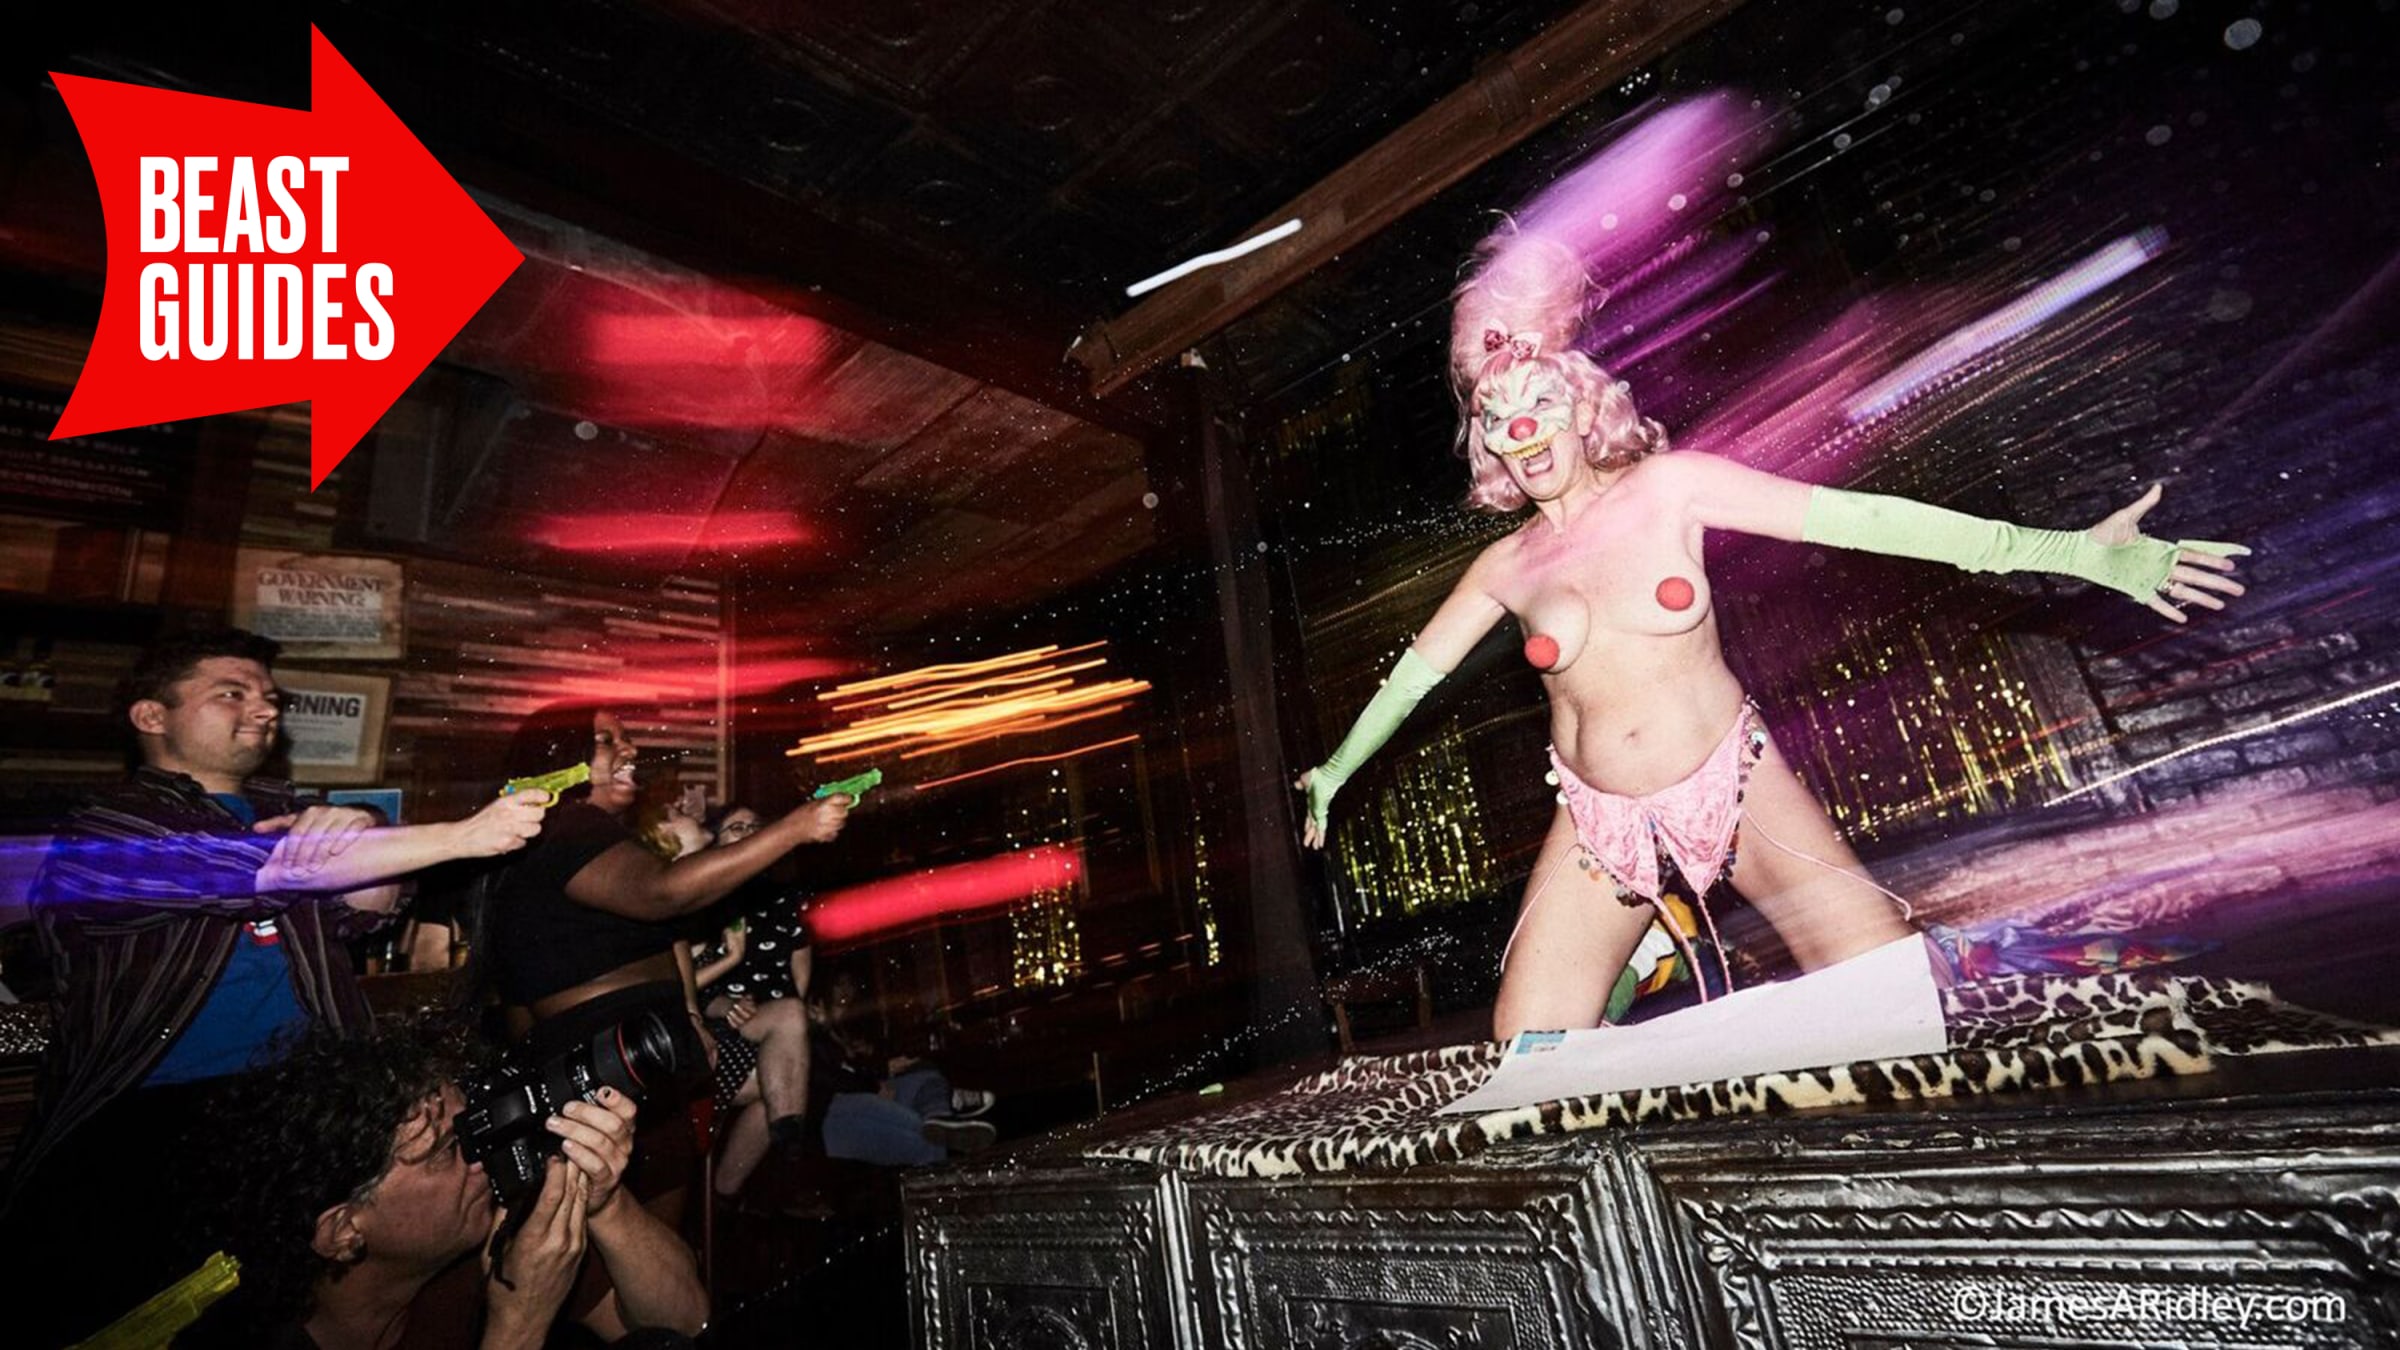 New York Citys Burlesques Your Guide to This Wild World photo pic